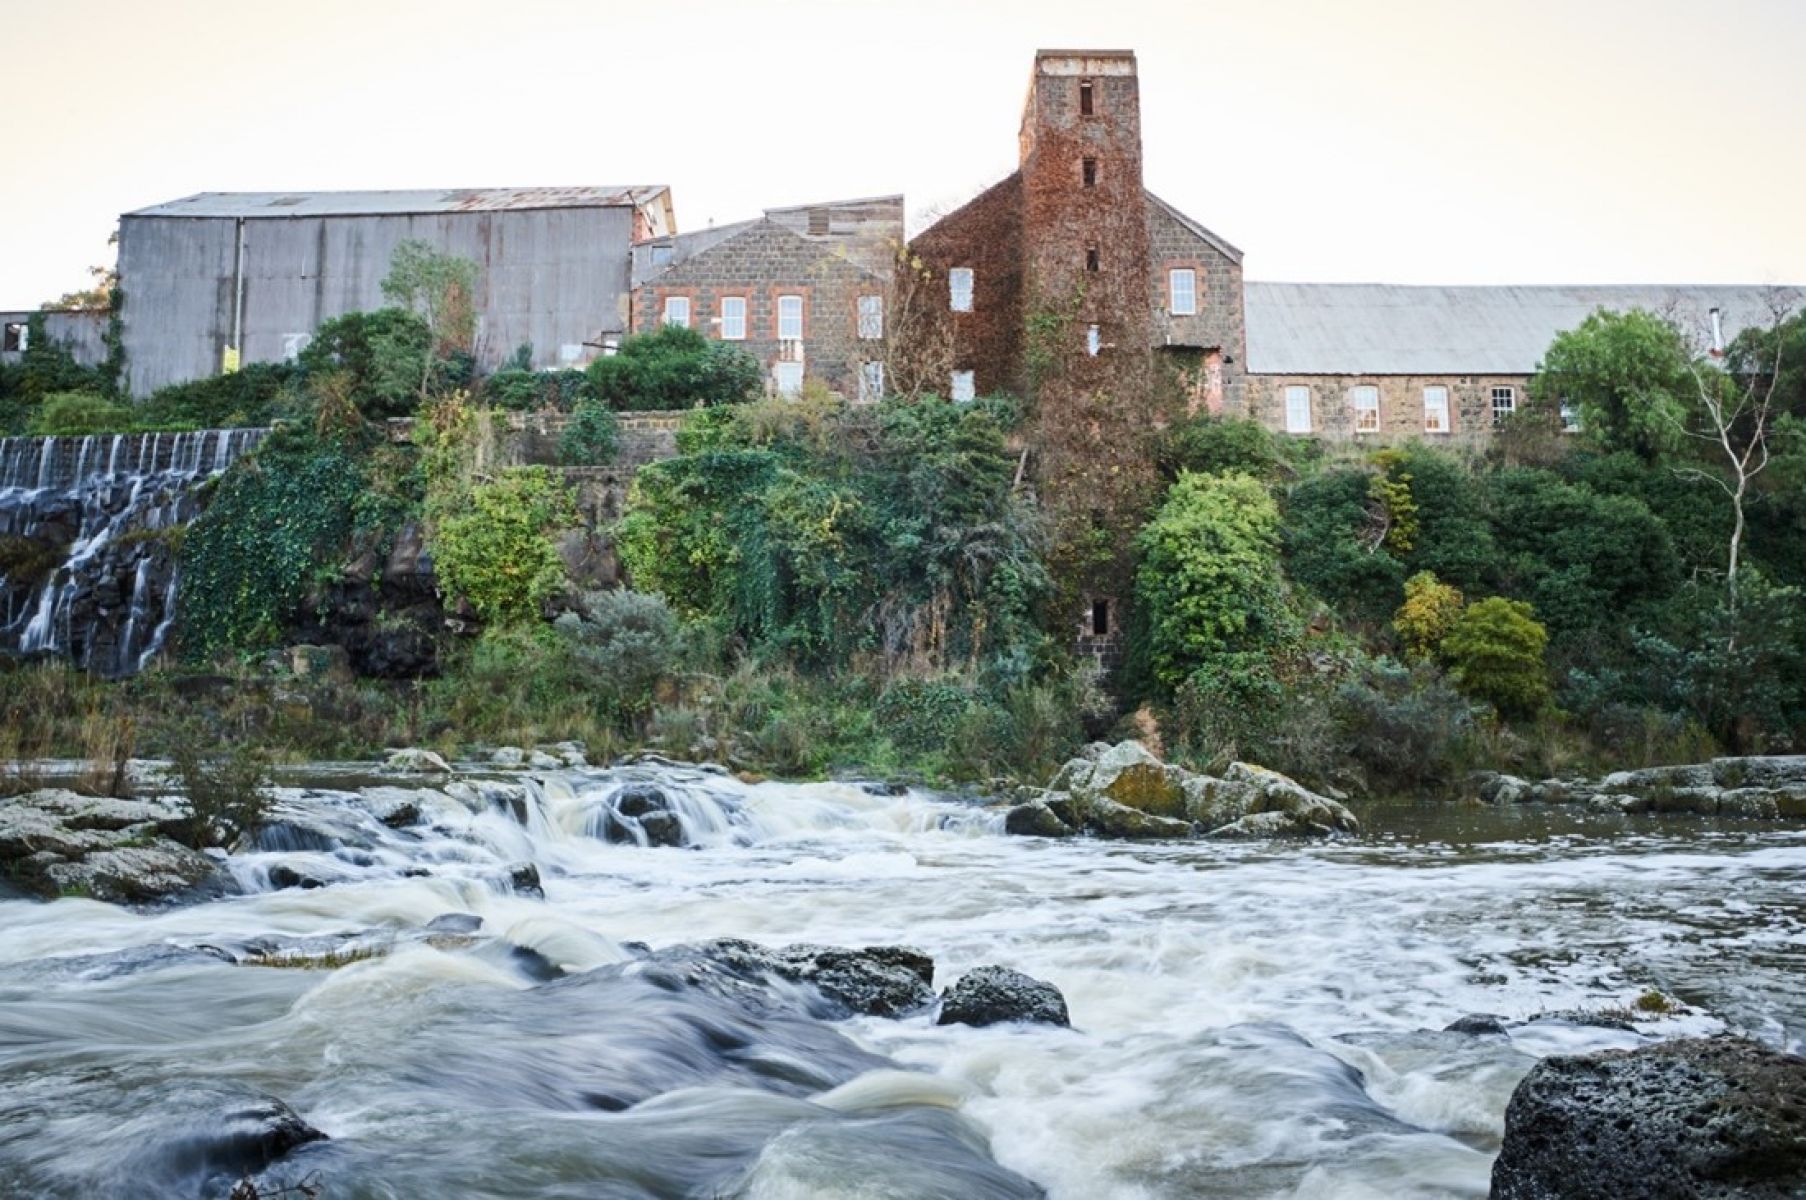 The river flows past a disused industrial building